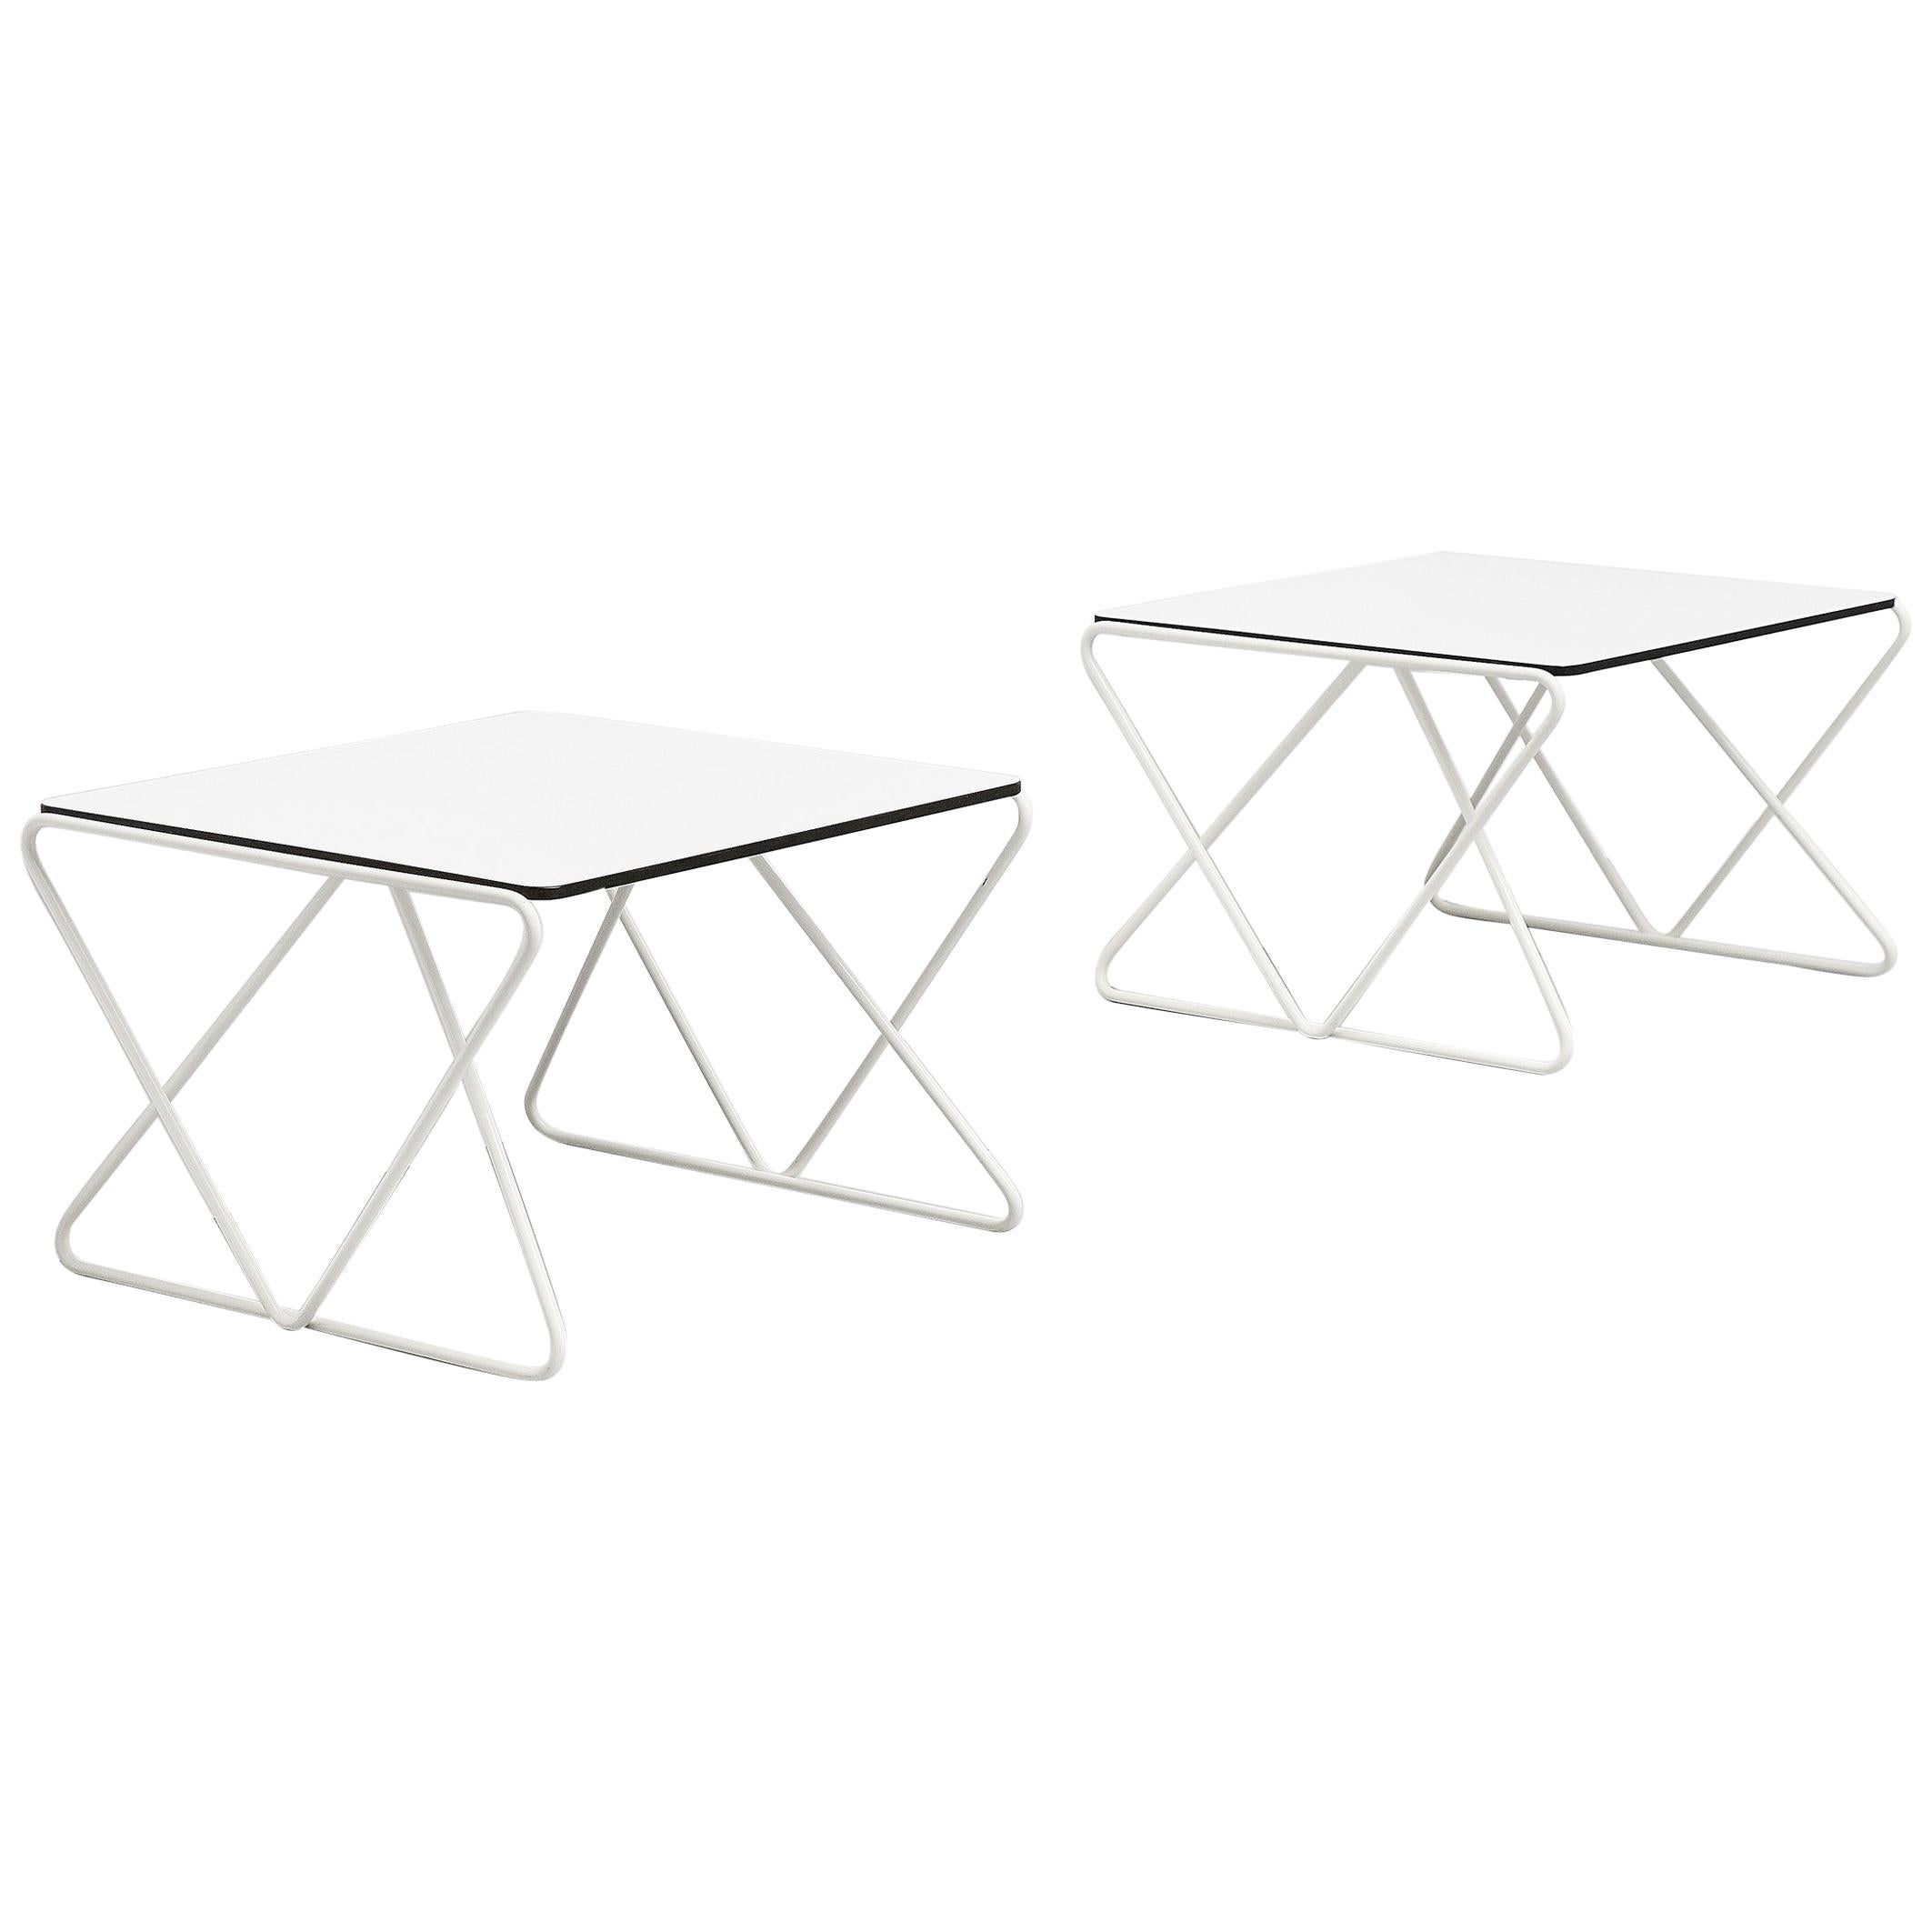 Walter Antonis Side Tables for I-Form Holland, 1978 For Sale